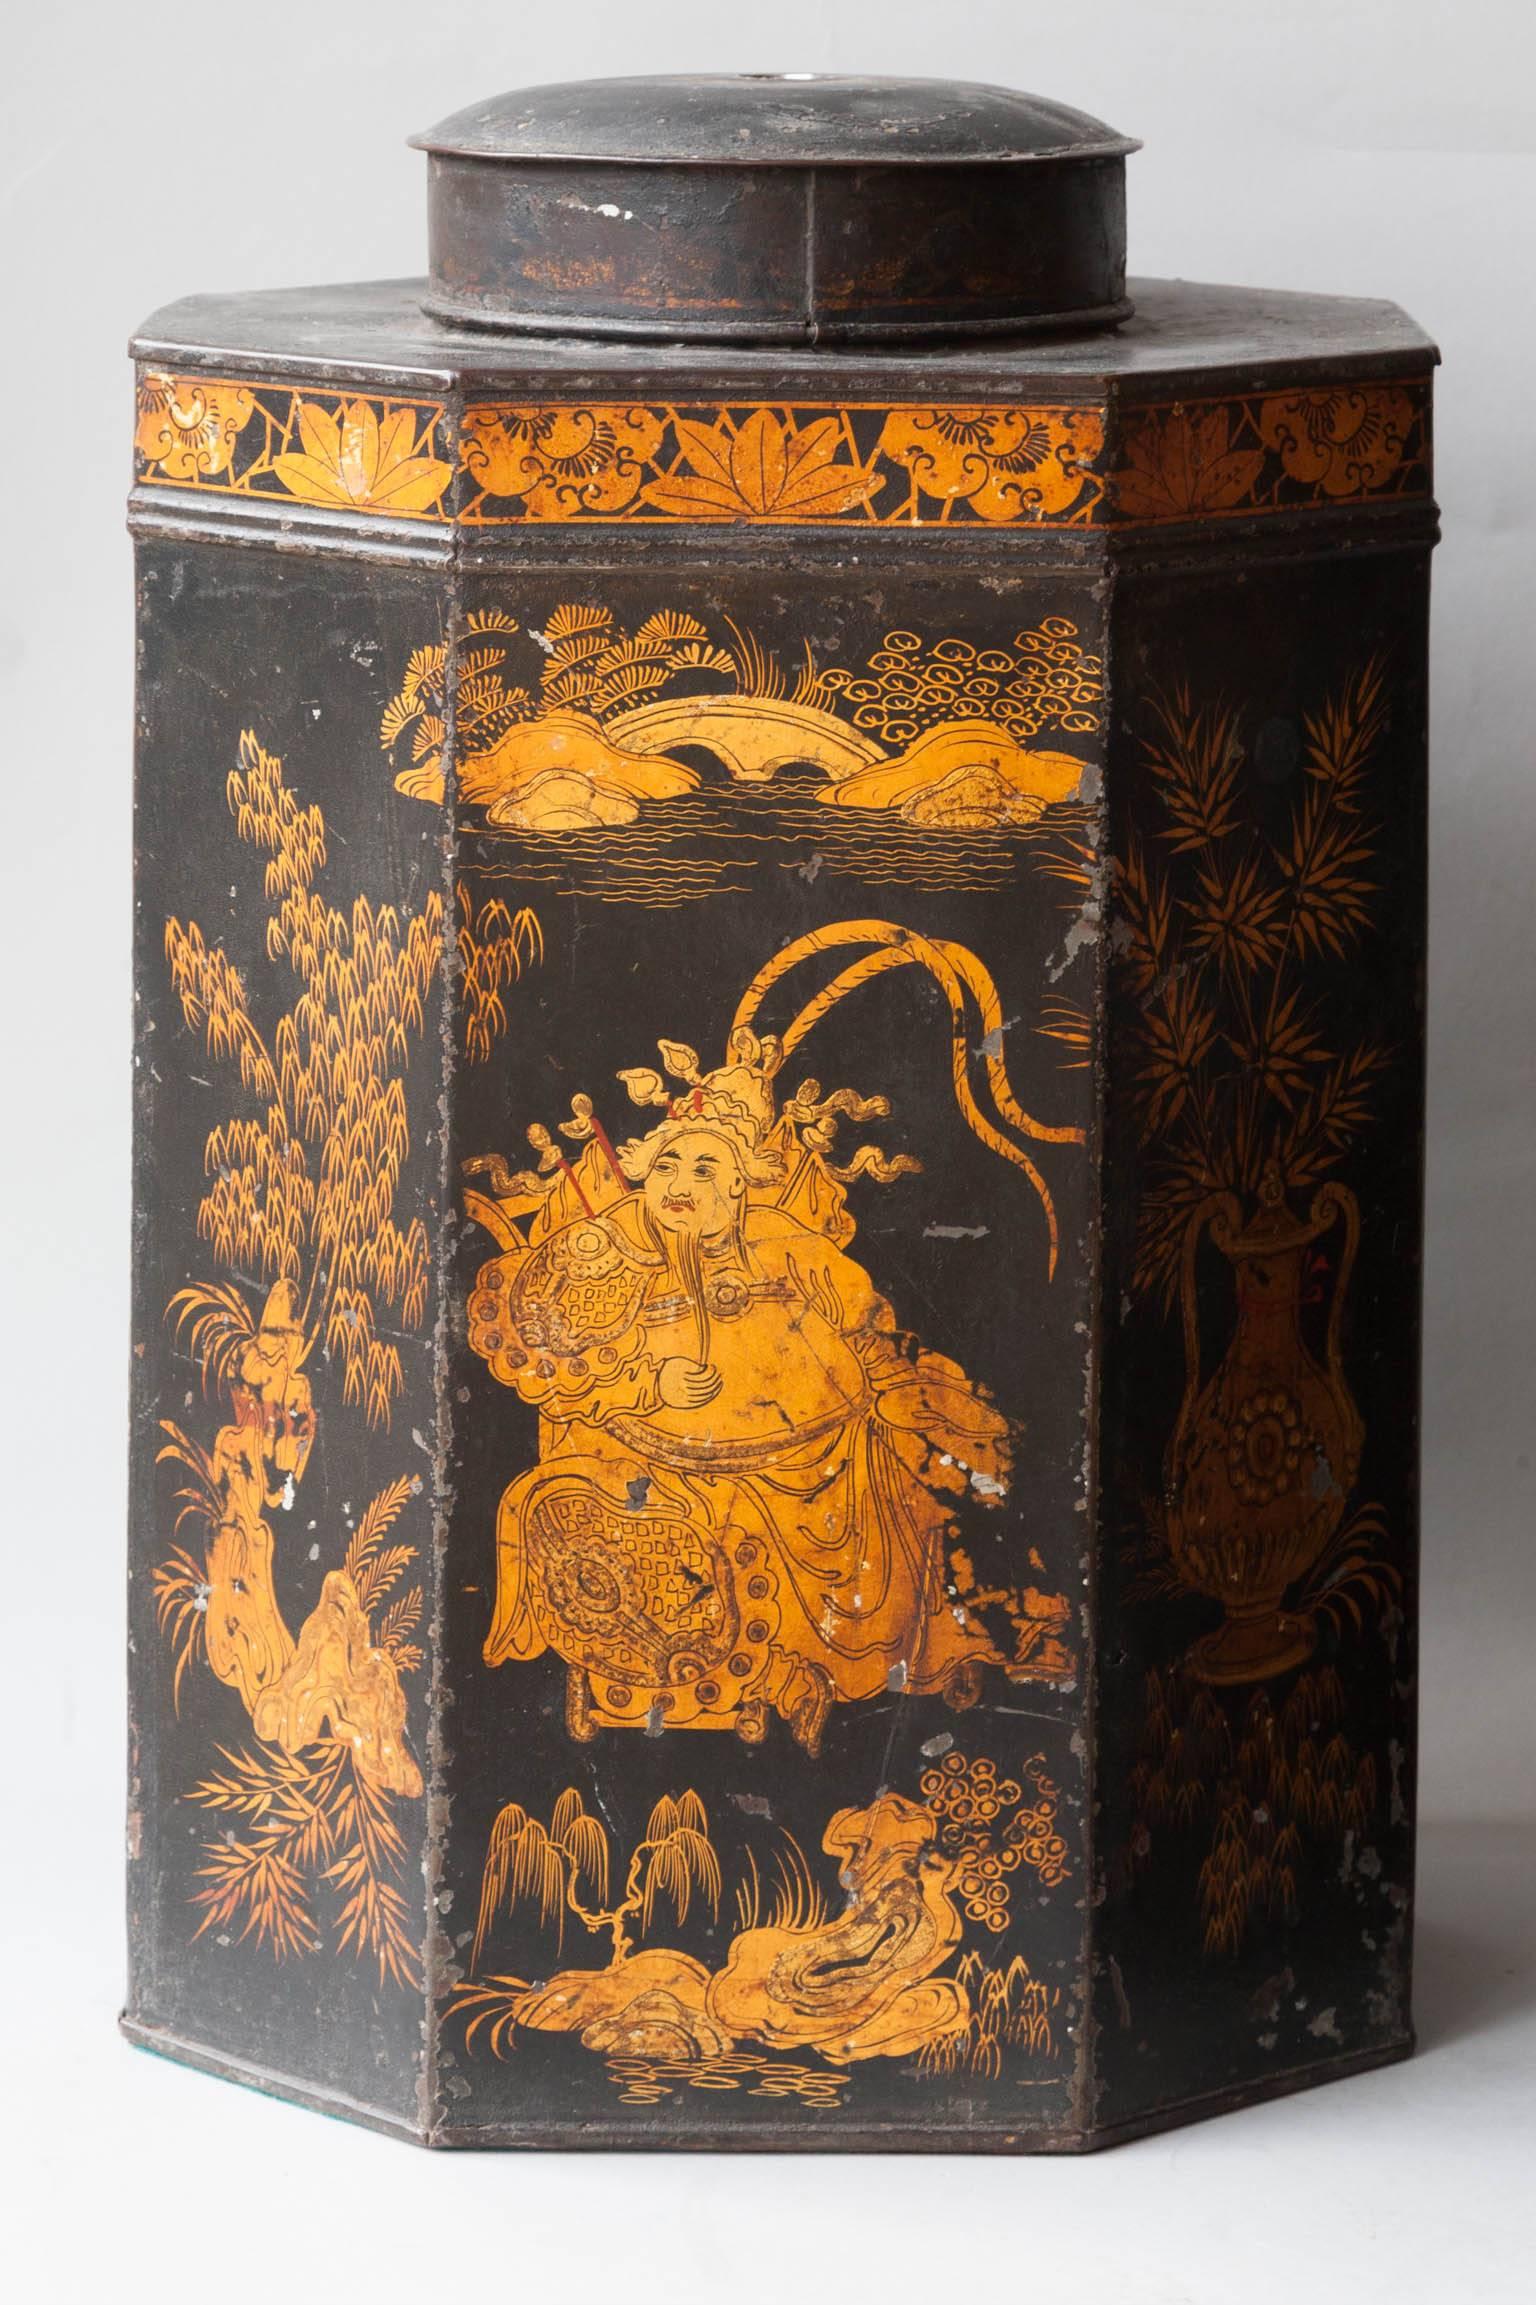 Each painted black with vibrant gold decoration of oriental gentlemen on the frontal, both in an extensive landscape led with trees, urns, bridges, rocks and owers. Labelled on the back 'W.B Dewson, maker 40 St. Paul's Square Liverpool'.